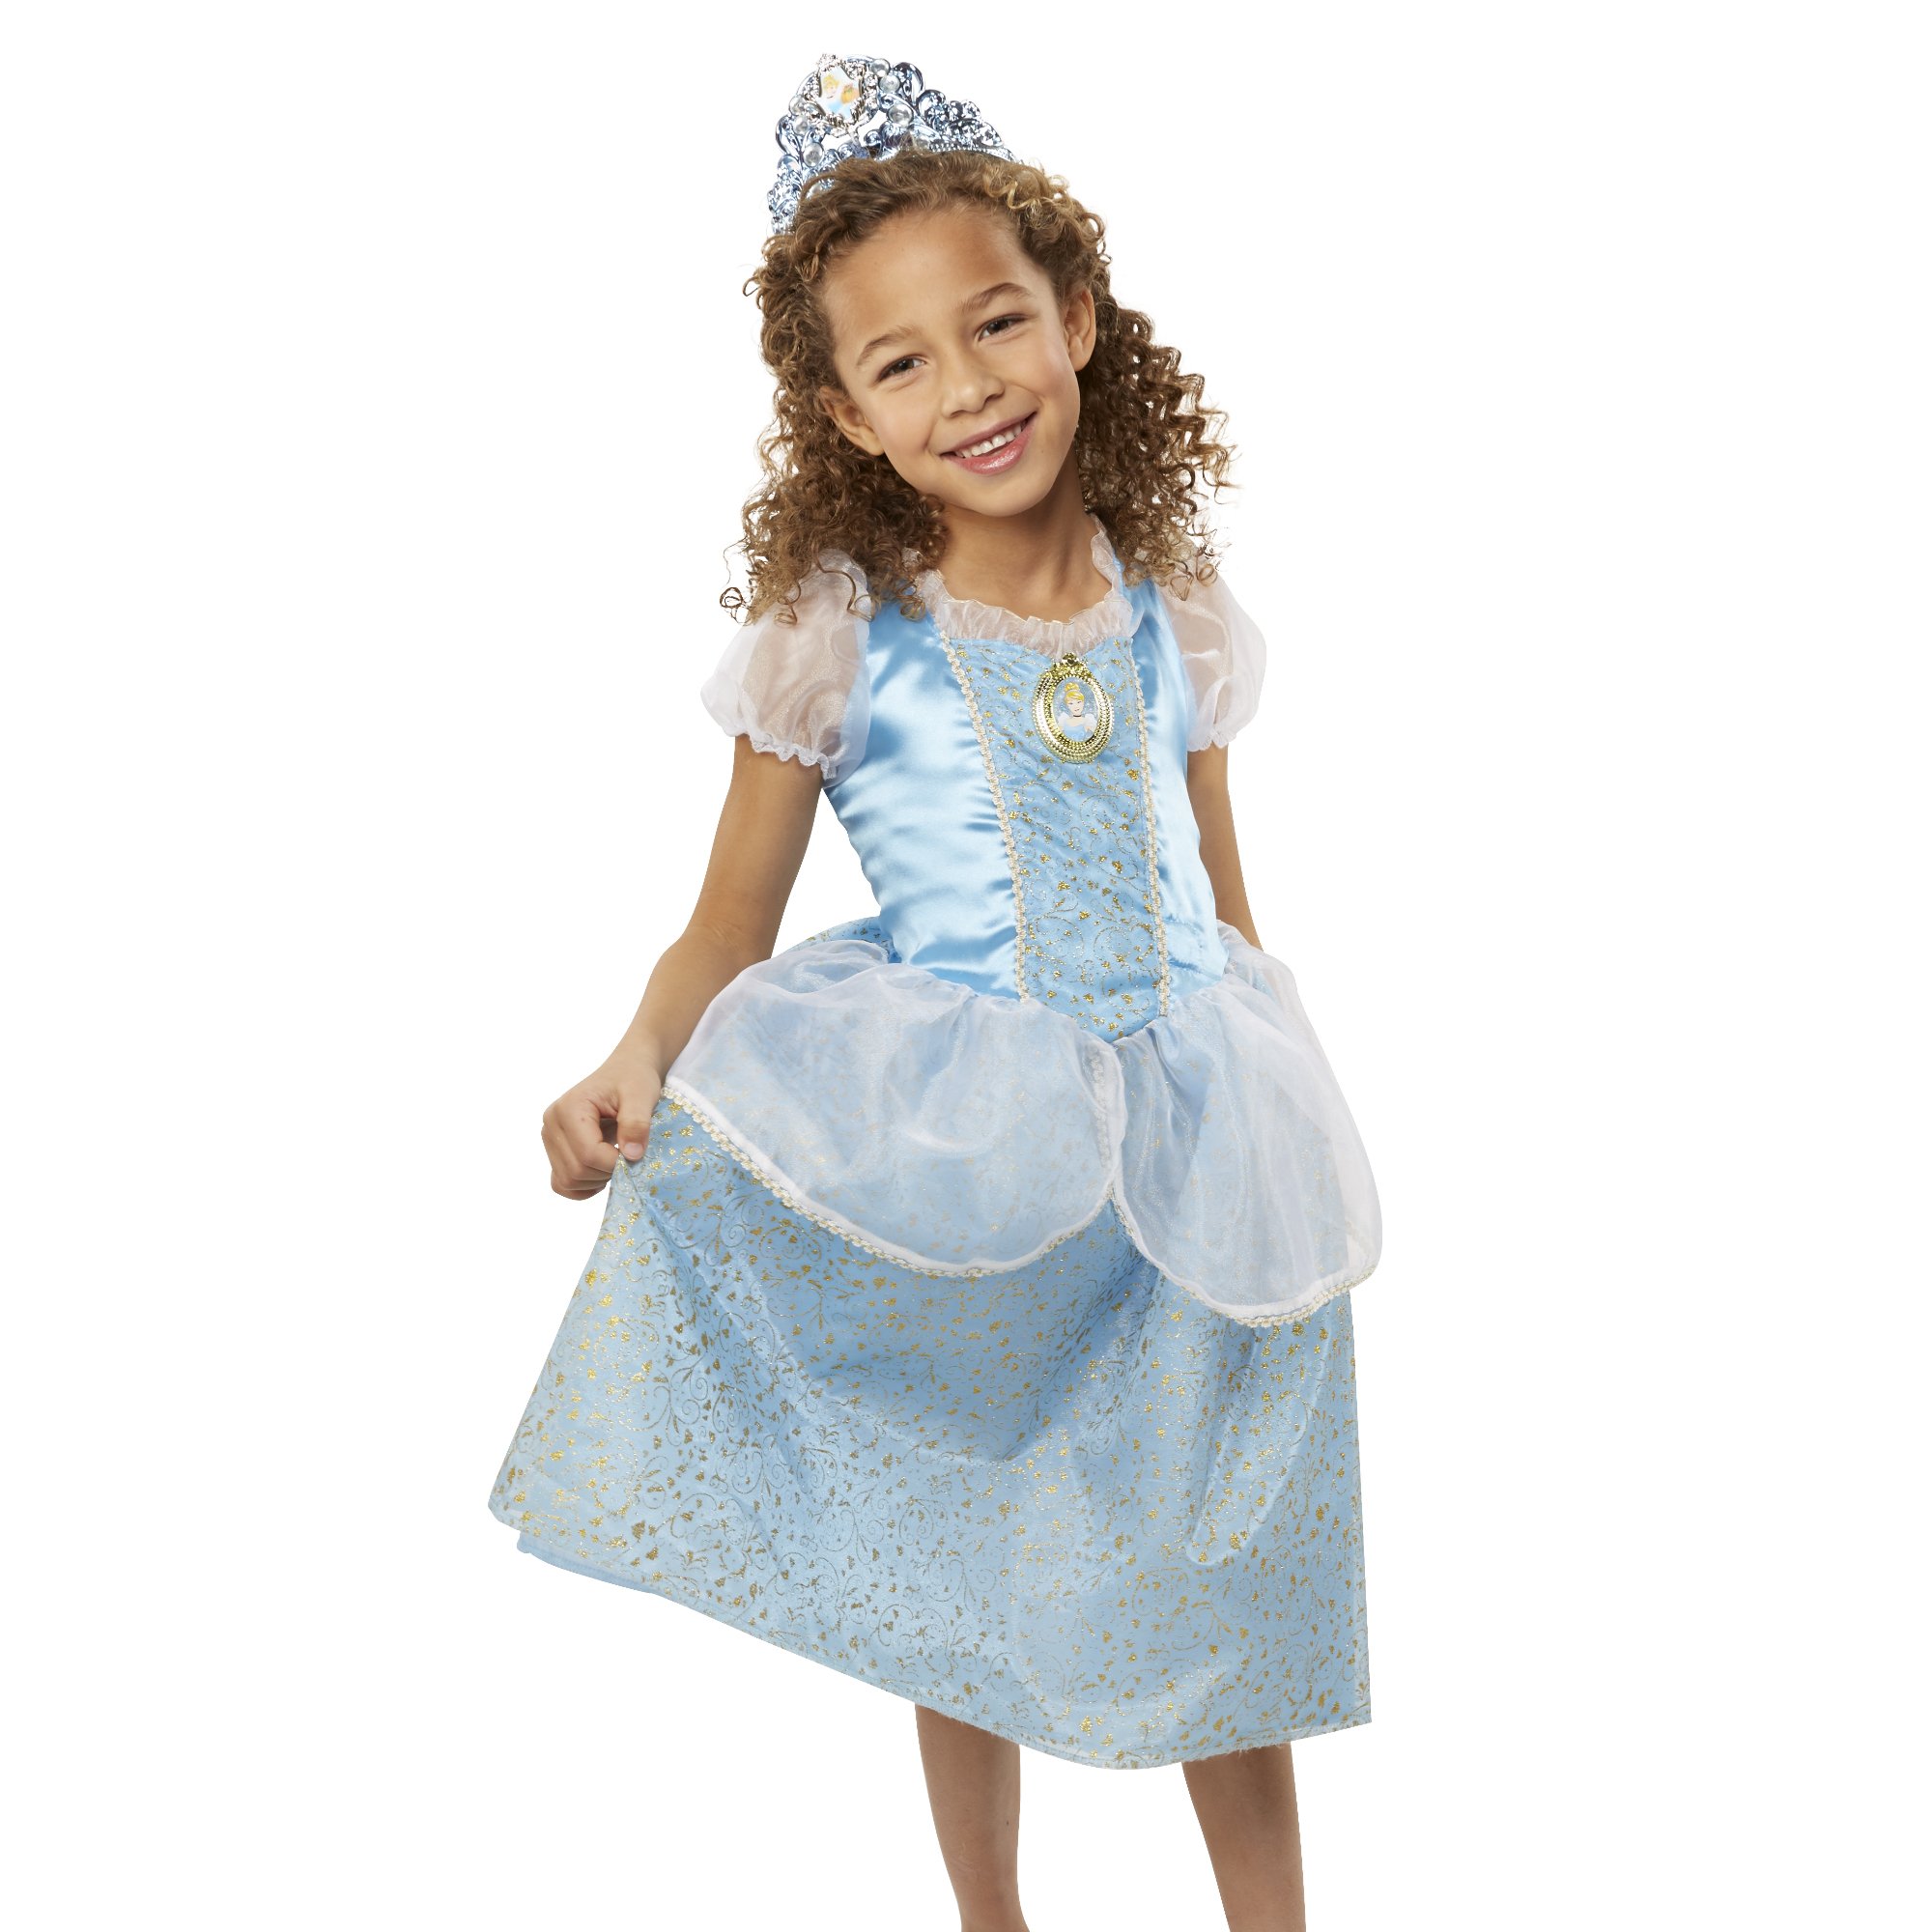 Disney Princess Cinderella Costume, Sing & Shimmer Musical Sparkling Dress, Sing-A-Long to “A Dream is A Wish Your Heart Makes” Perfect for Party, Halloween or Dress Up [Amazon Exclusive]